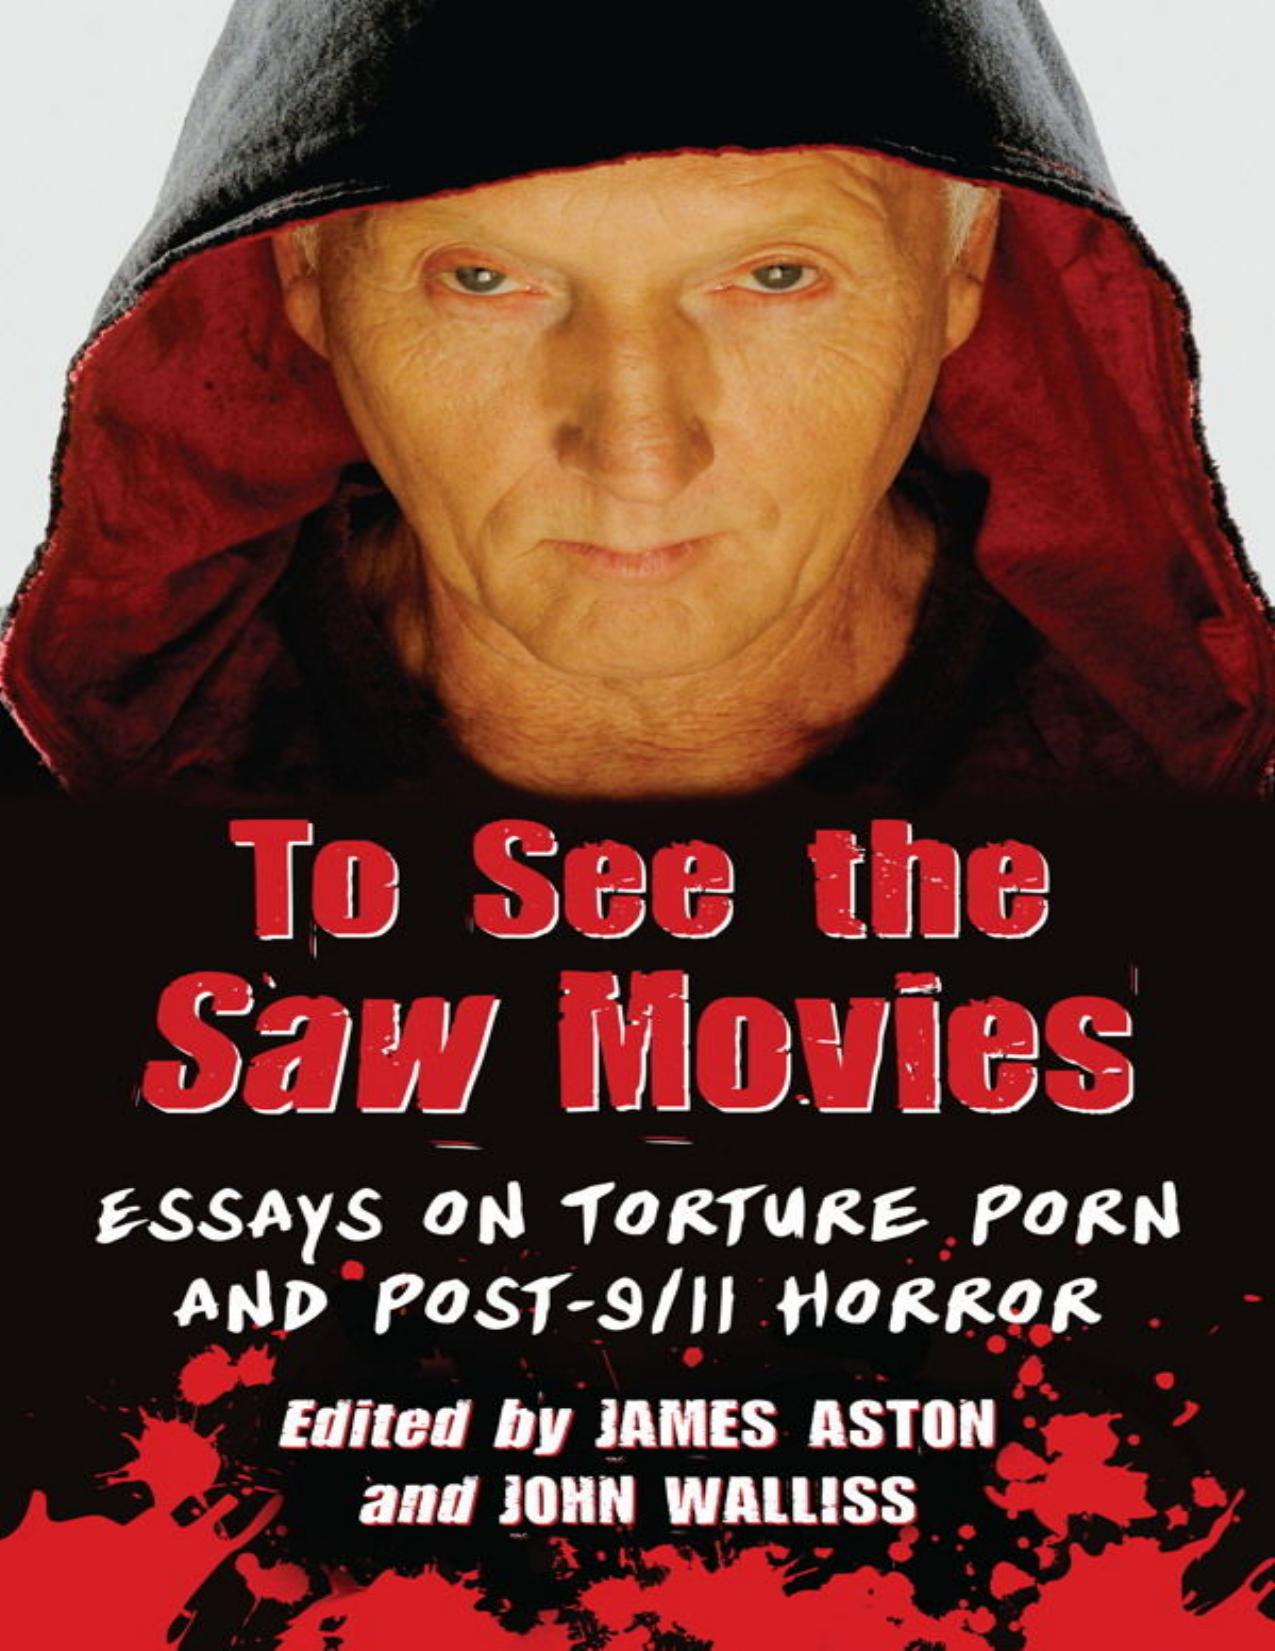 To See the Saw Movies: Essays on Torture Porn and Post-9/11 Horror by James Aston; John Walliss